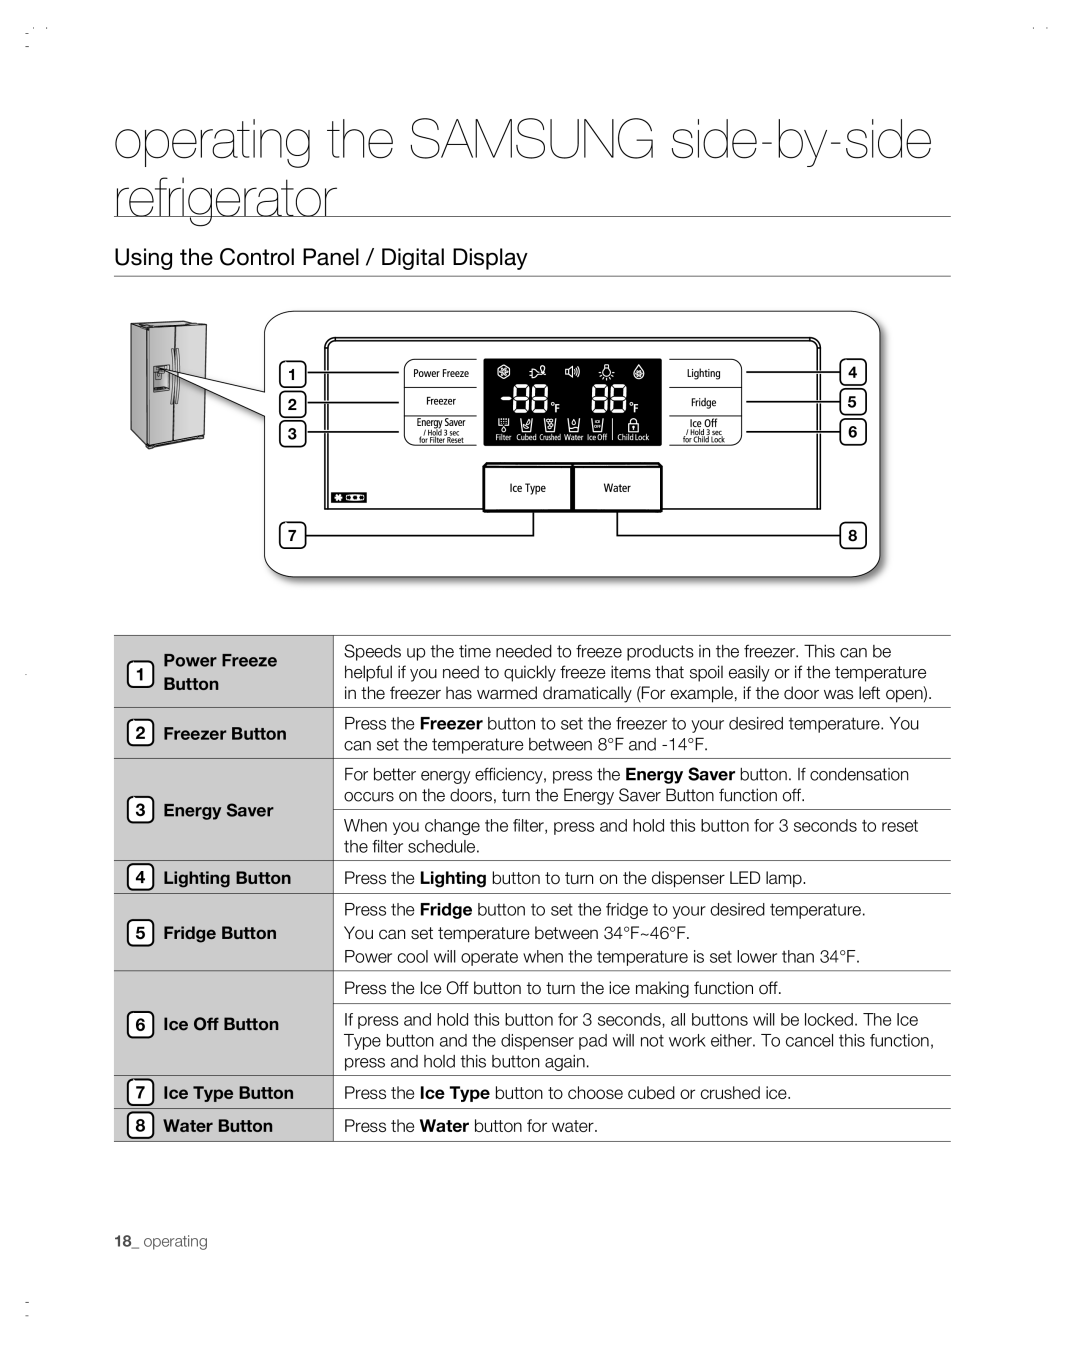 Samsung RSG257AABP user manual operating the SAMSUNG side-by-side refrigerator, Using the Control Panel / Digital Display 